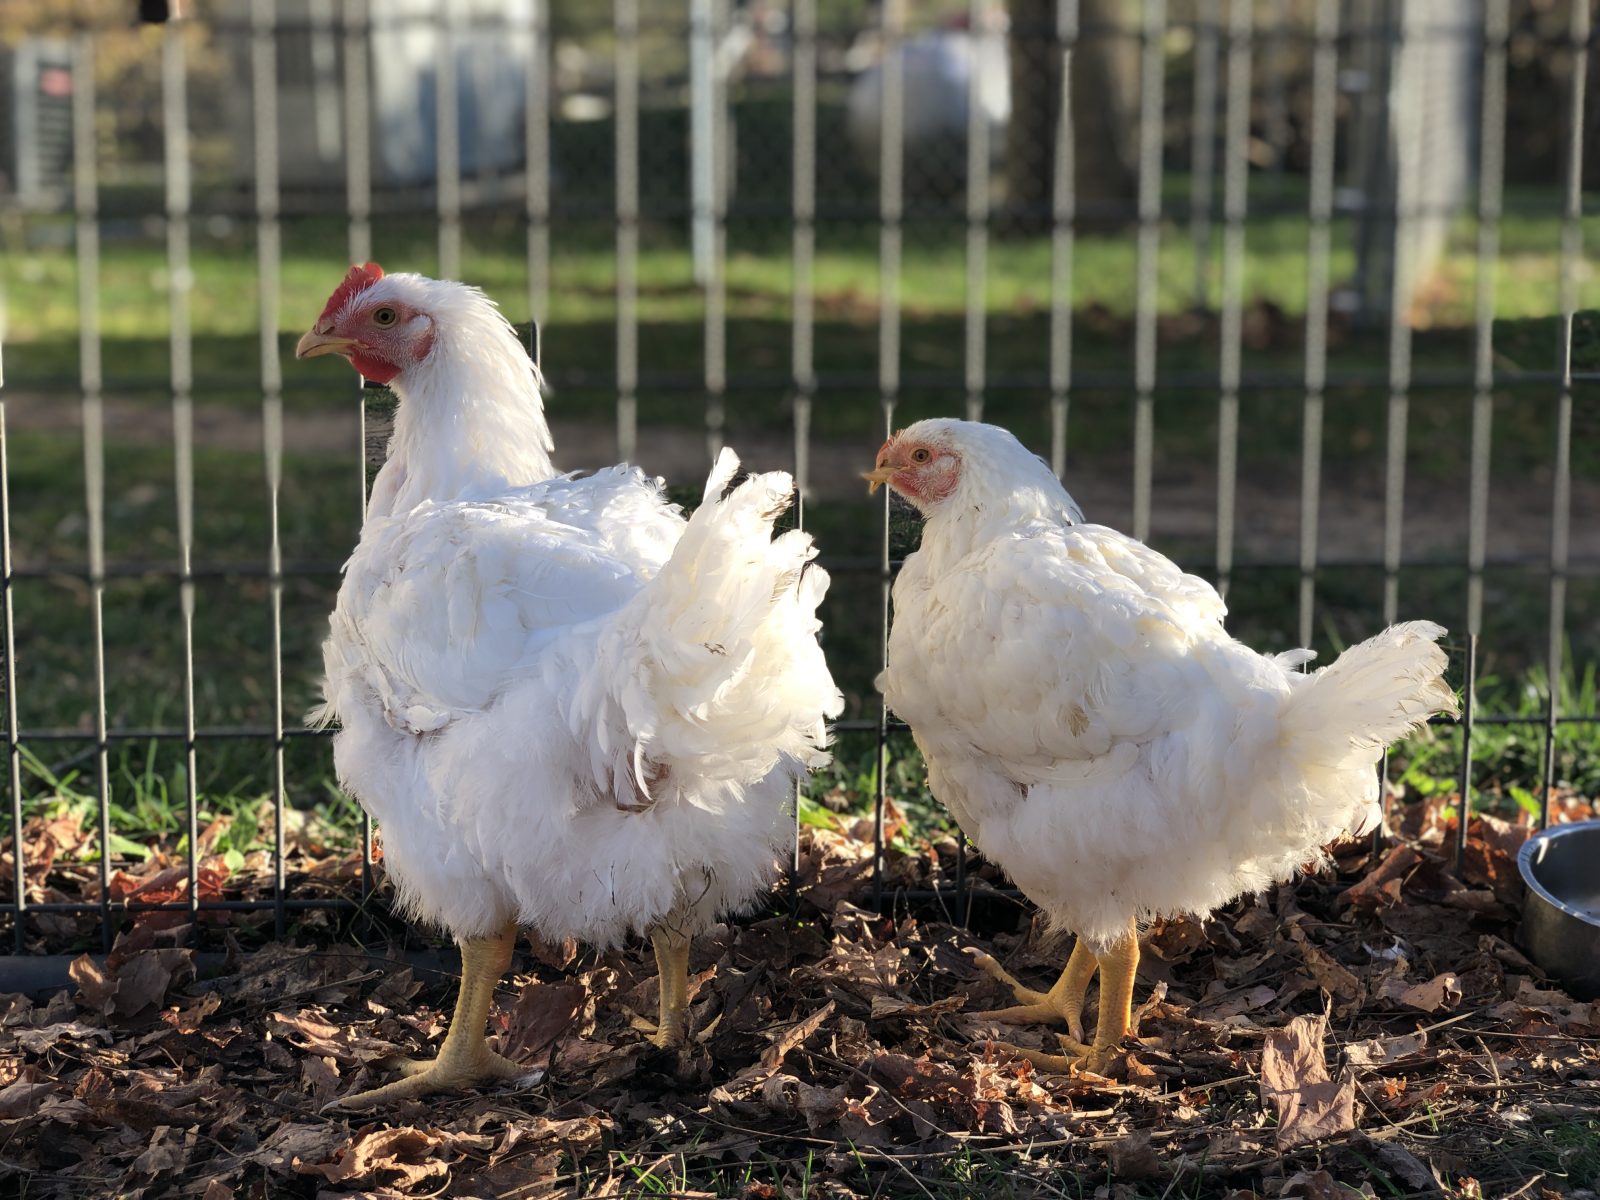 Tilly and Nilly at Farm Sanctuary